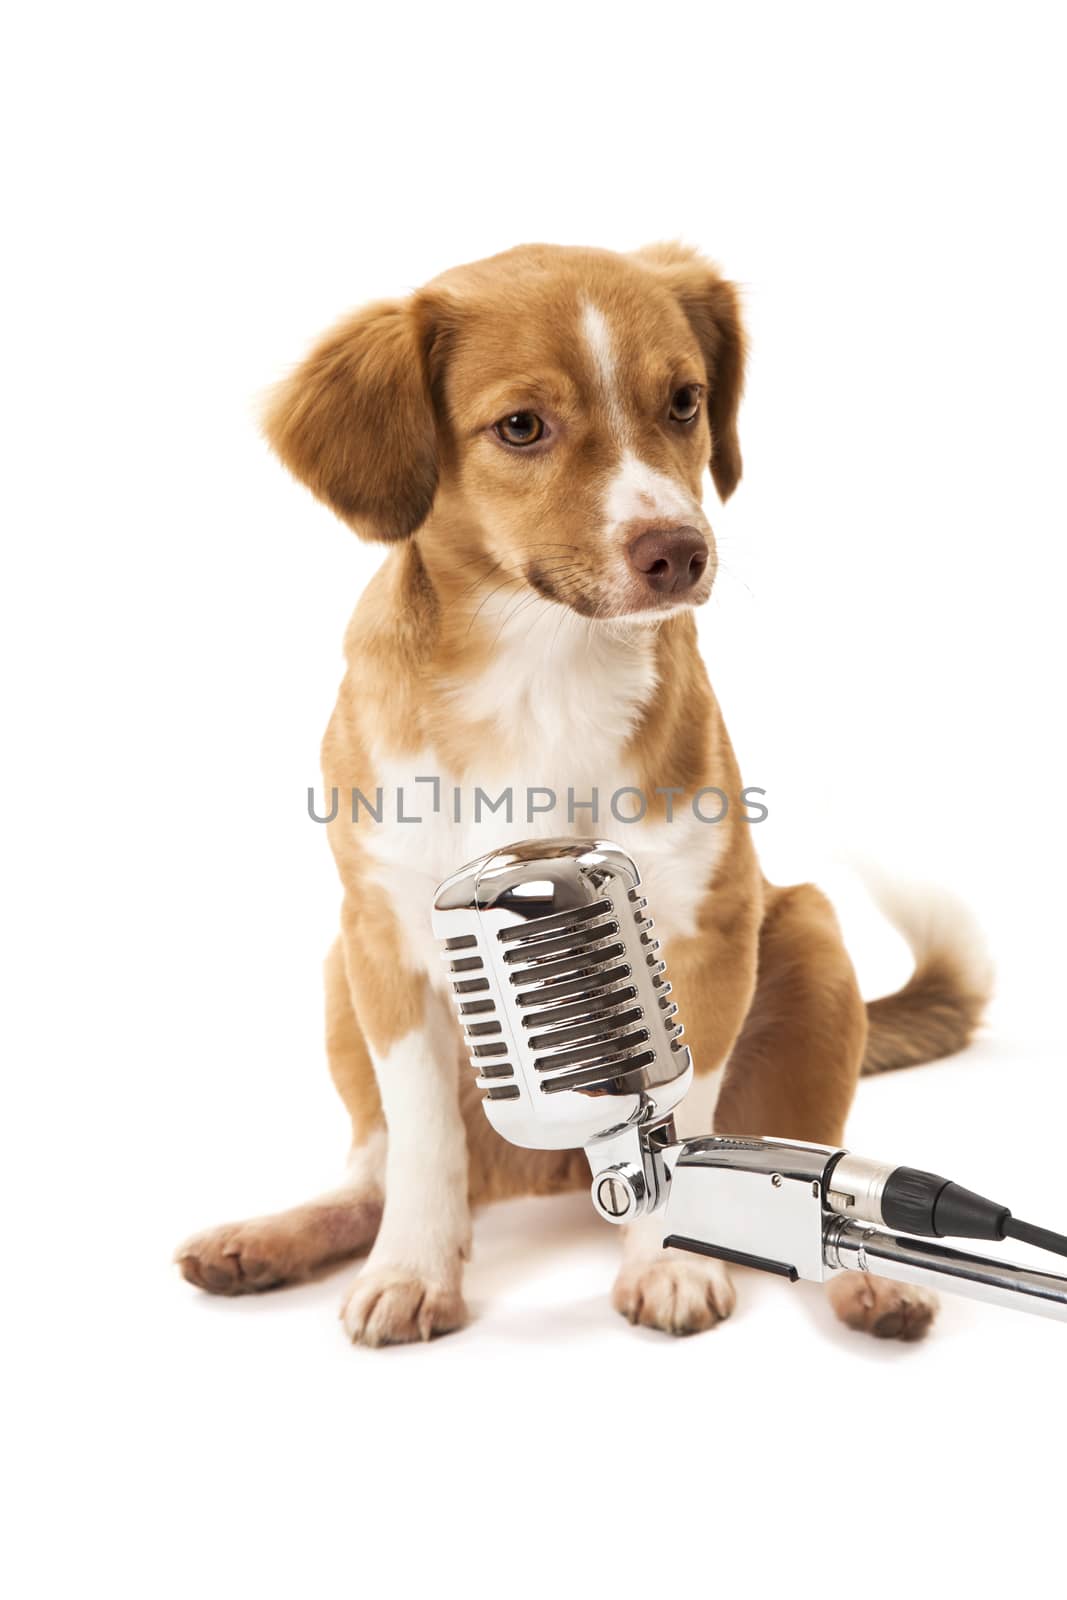 Portrait of cute dog in front of vintage microphone over white background